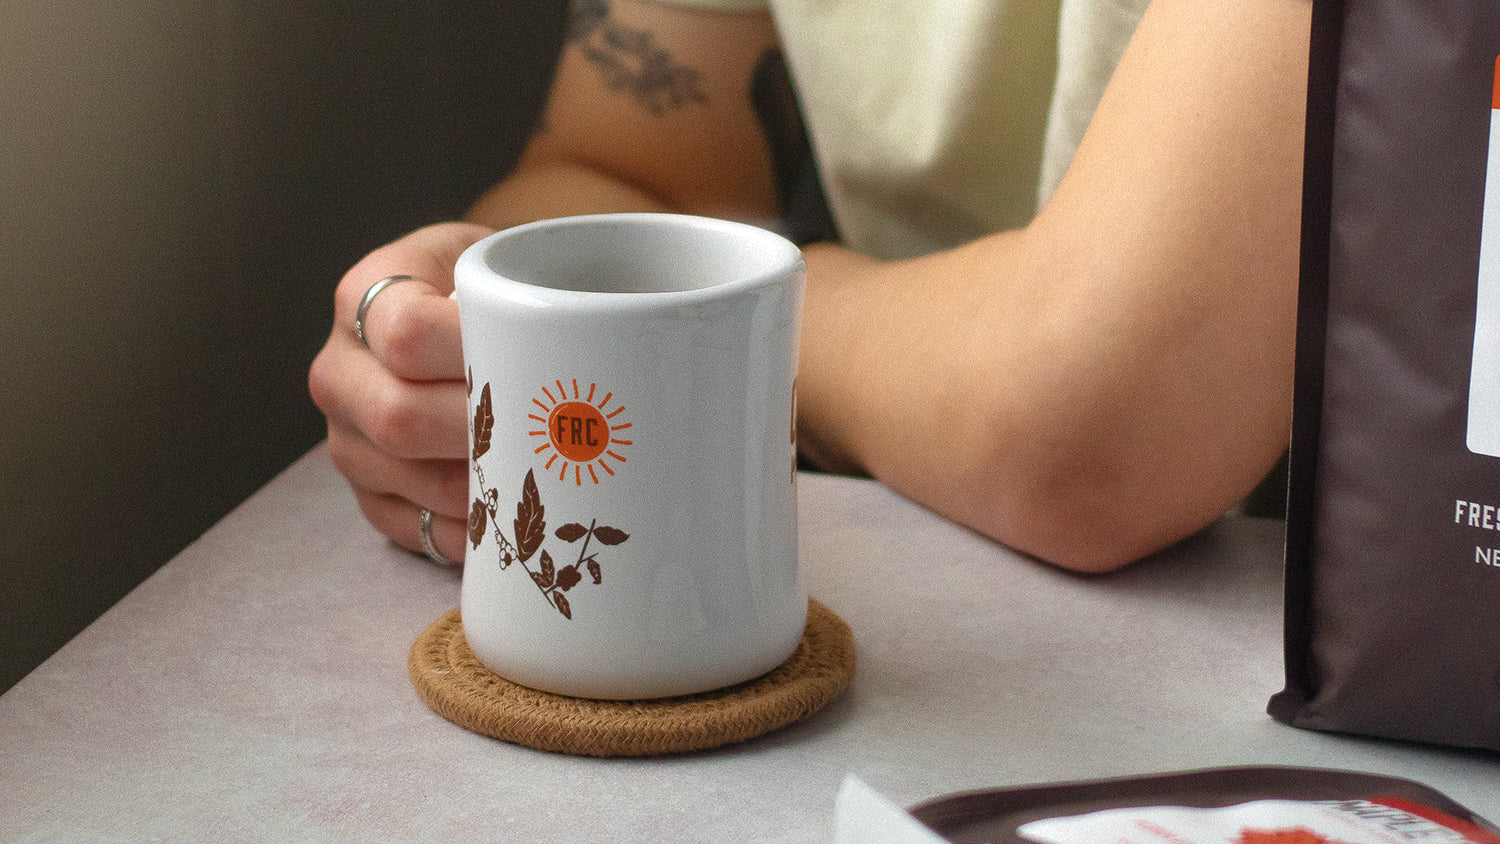 Person holding diner mug resting on a table.